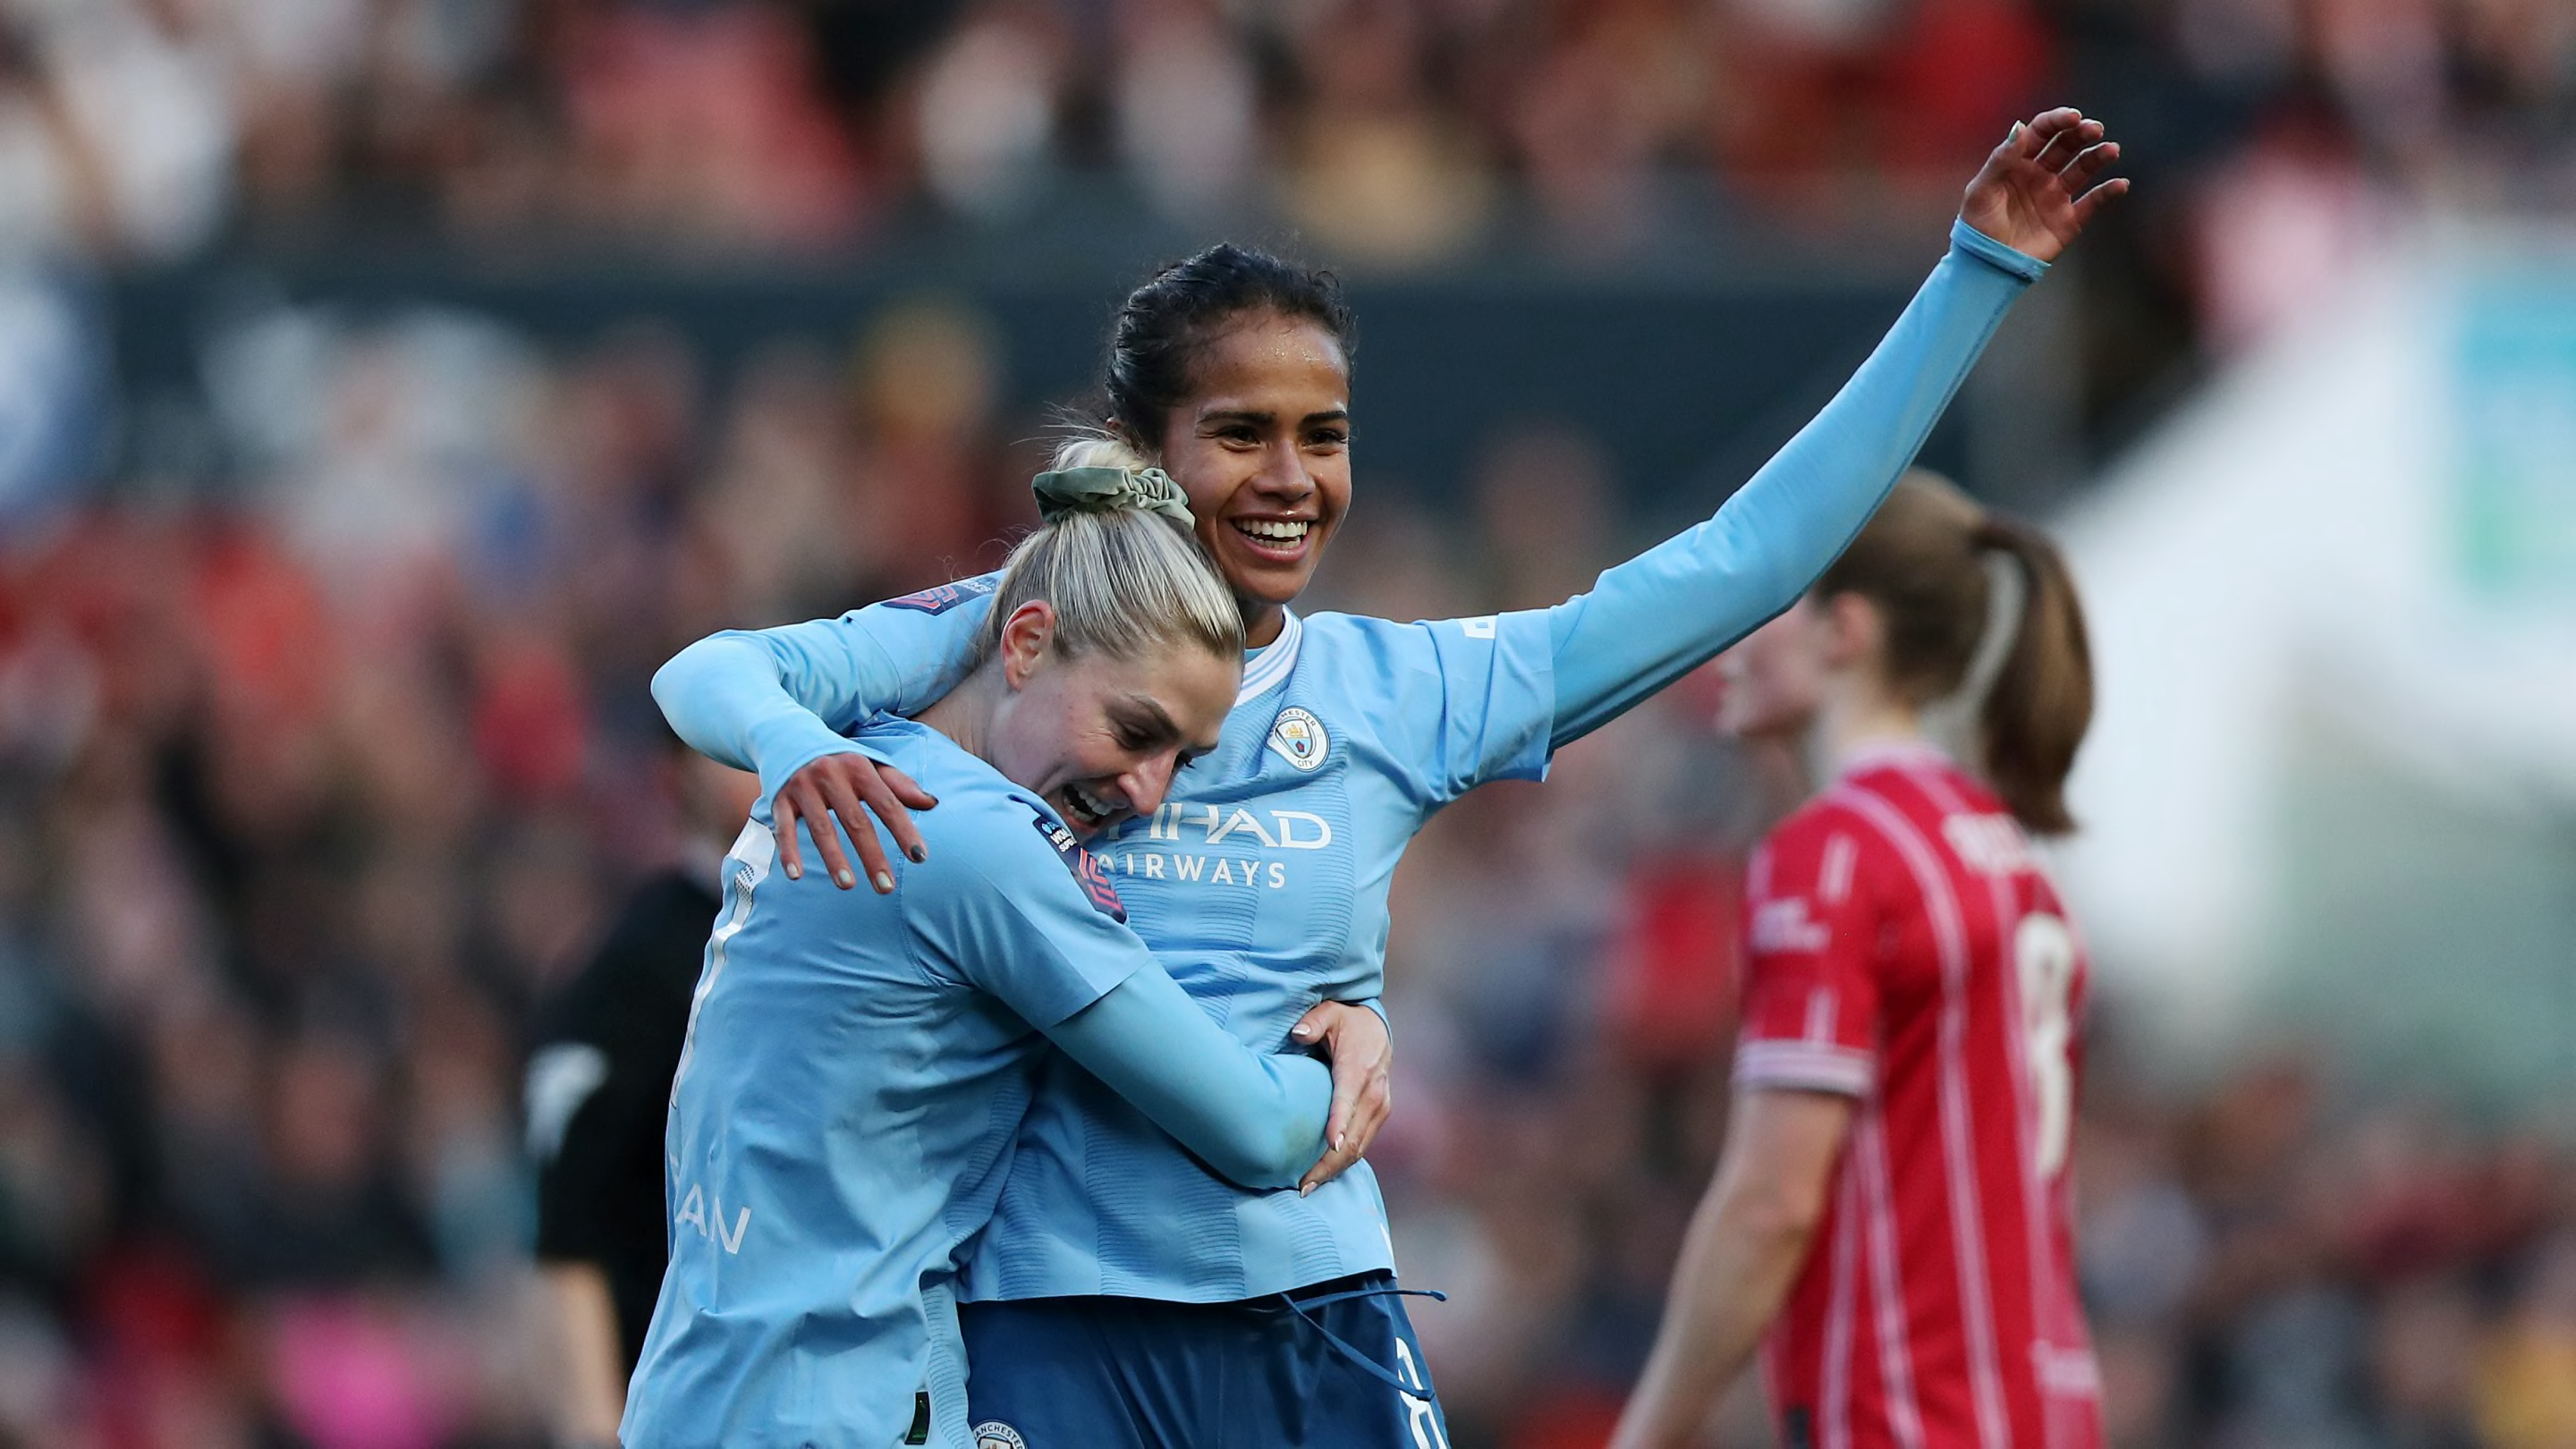 Bristol City 0-4 Manchester City: Player ratings as Mary Fowler steps up in Khadija Shaw’s absence